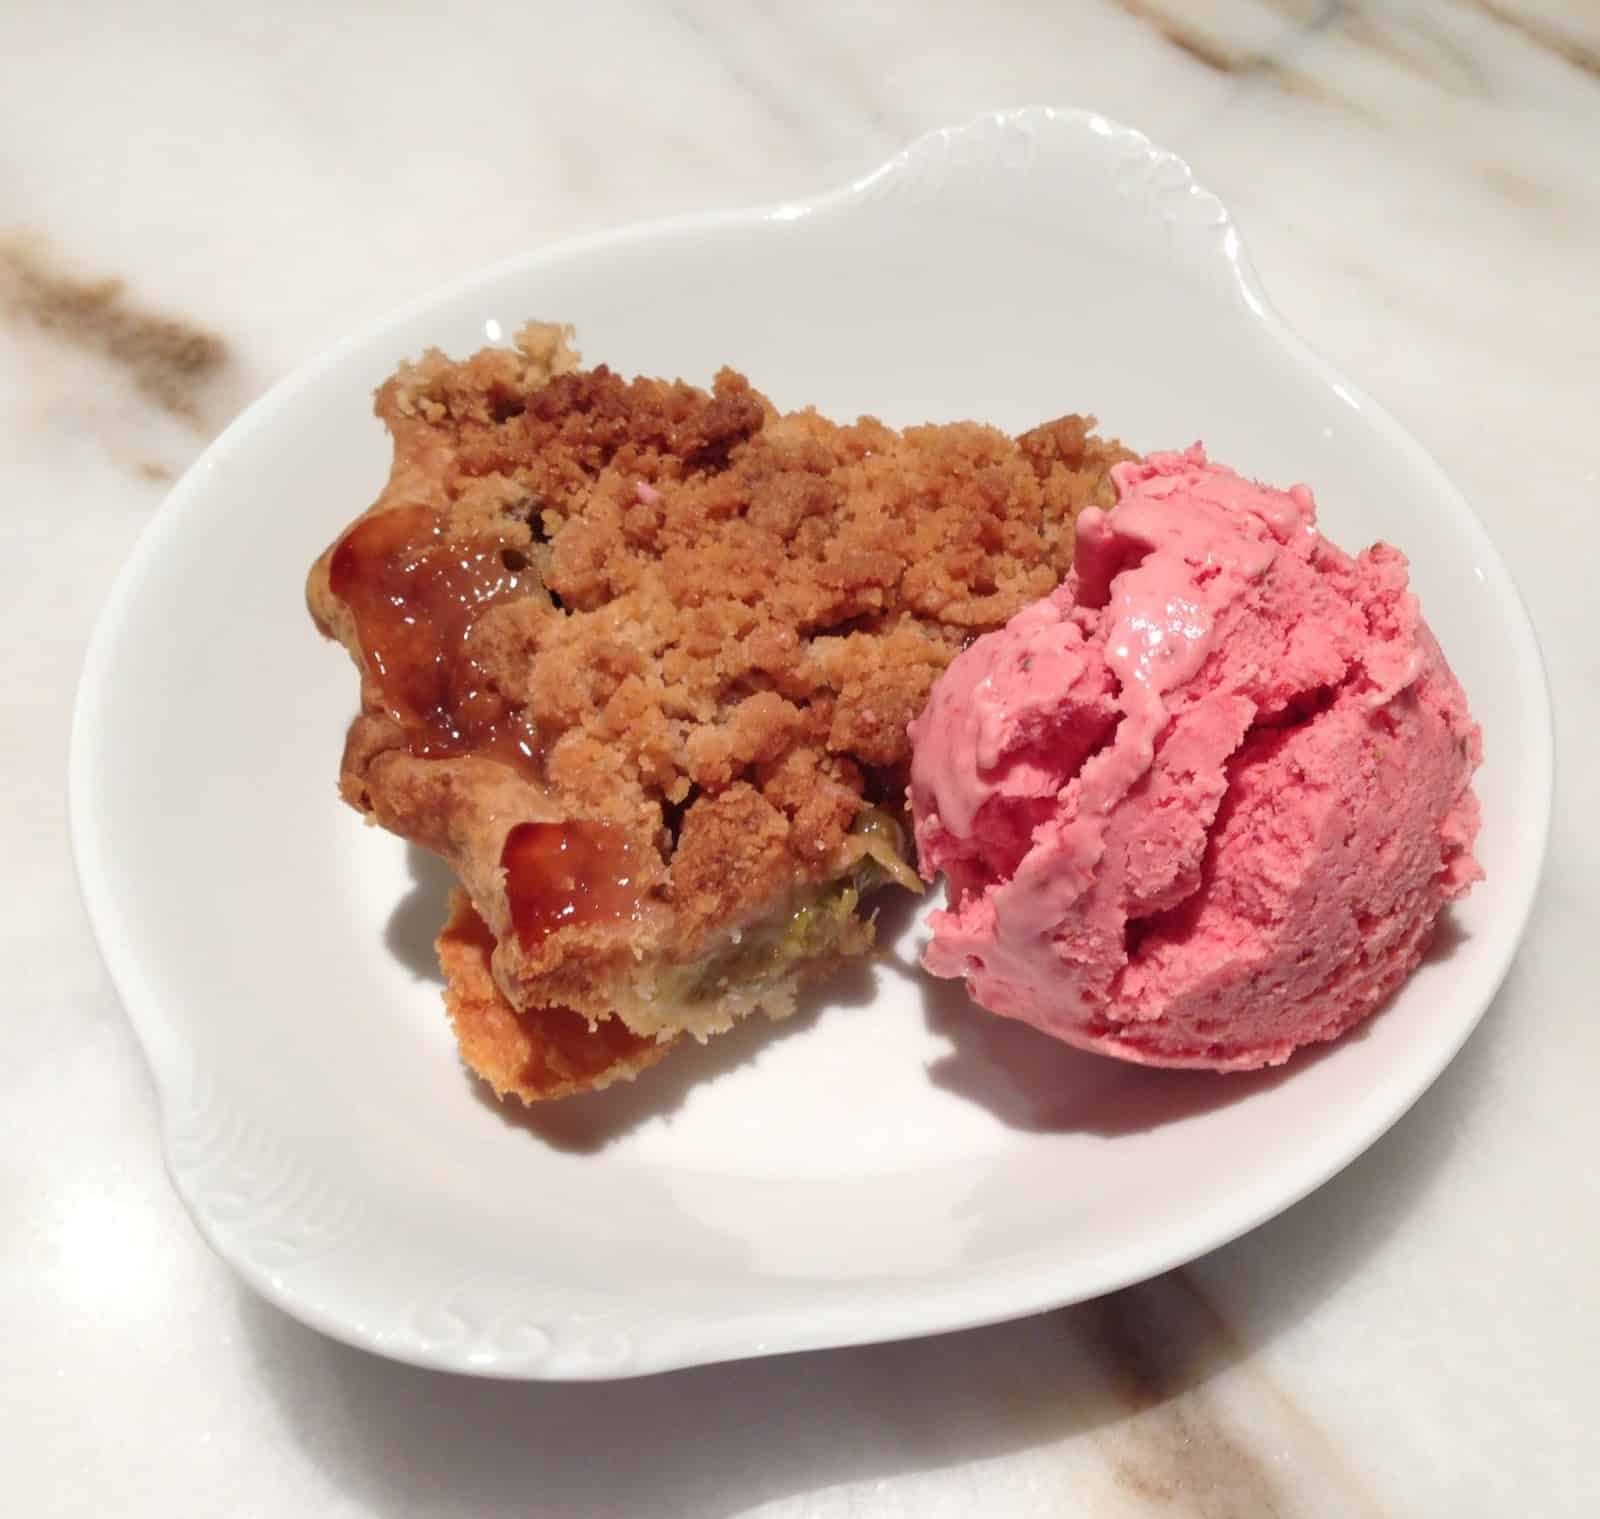 It’s the 4th of July! Time to make this glorious Rhubarb Crumble Pie with a scoop of Strawberry Sour Cream Ice Cream